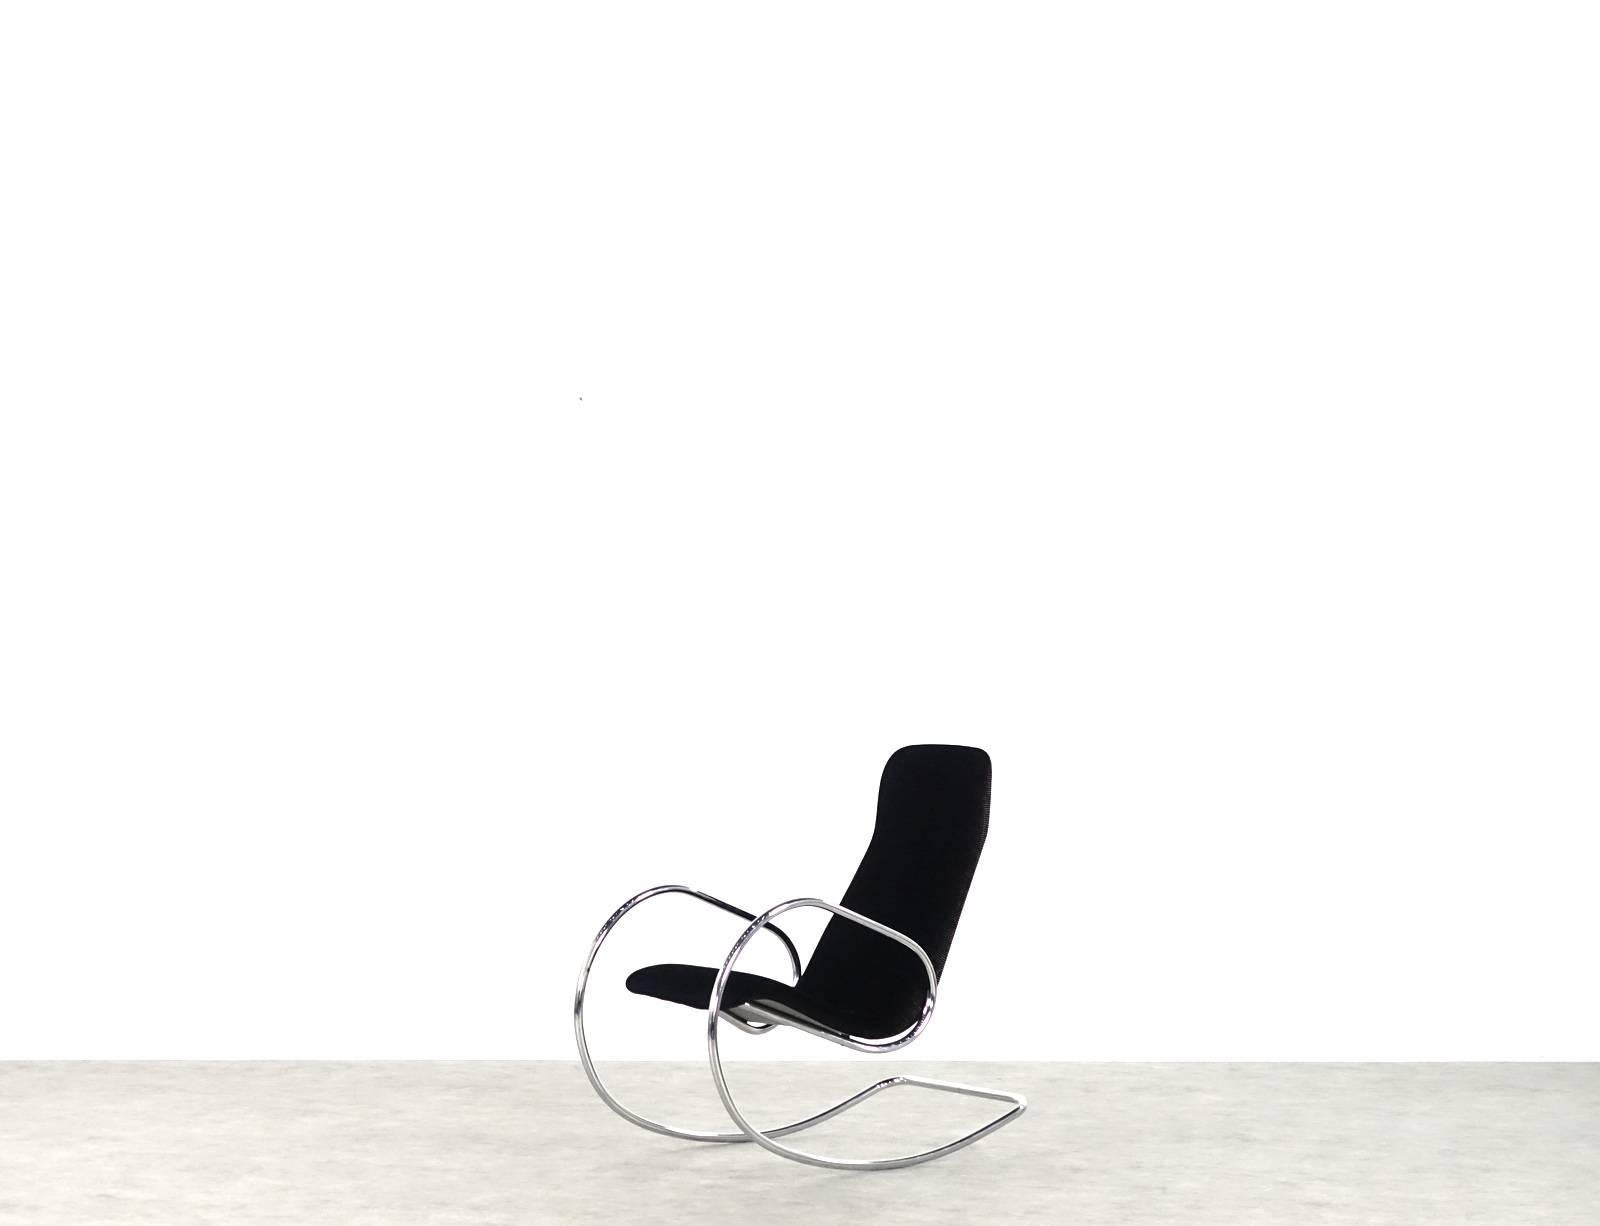 Prof. Ulrich Bohme rocking chair S 826 for Thonet. Draft of 1971. Steel pipe rocking chair with cantilever function, molded plywood bucket, padding of cold foam, round tubular frame. Underside original label Thonet.